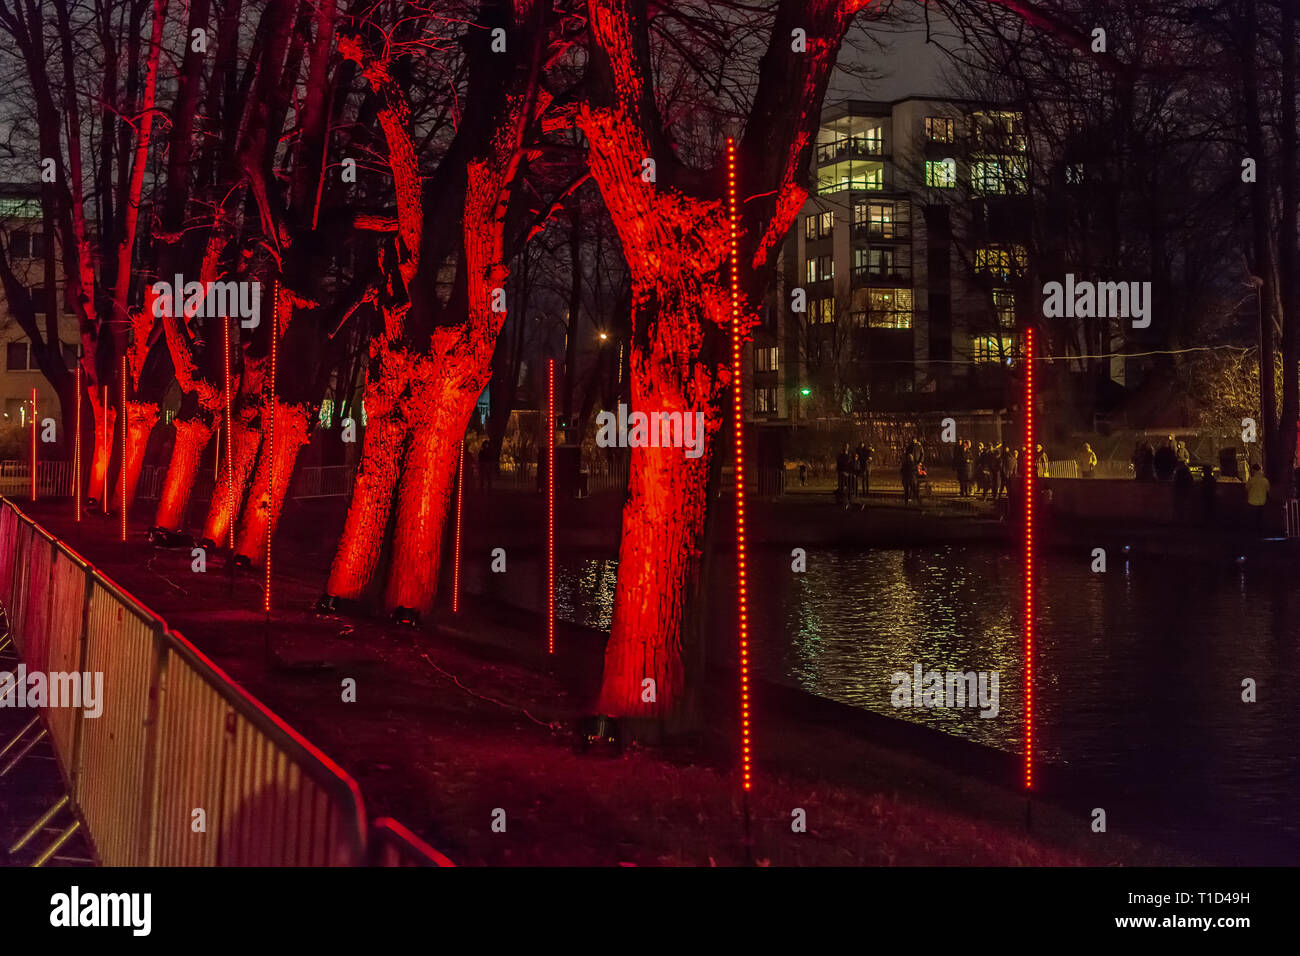 Red trees the river bank illuminated by red lights as part of 'Forest of Sensations' installation during the festival of light "Staro Riga Stock Photo - Alamy